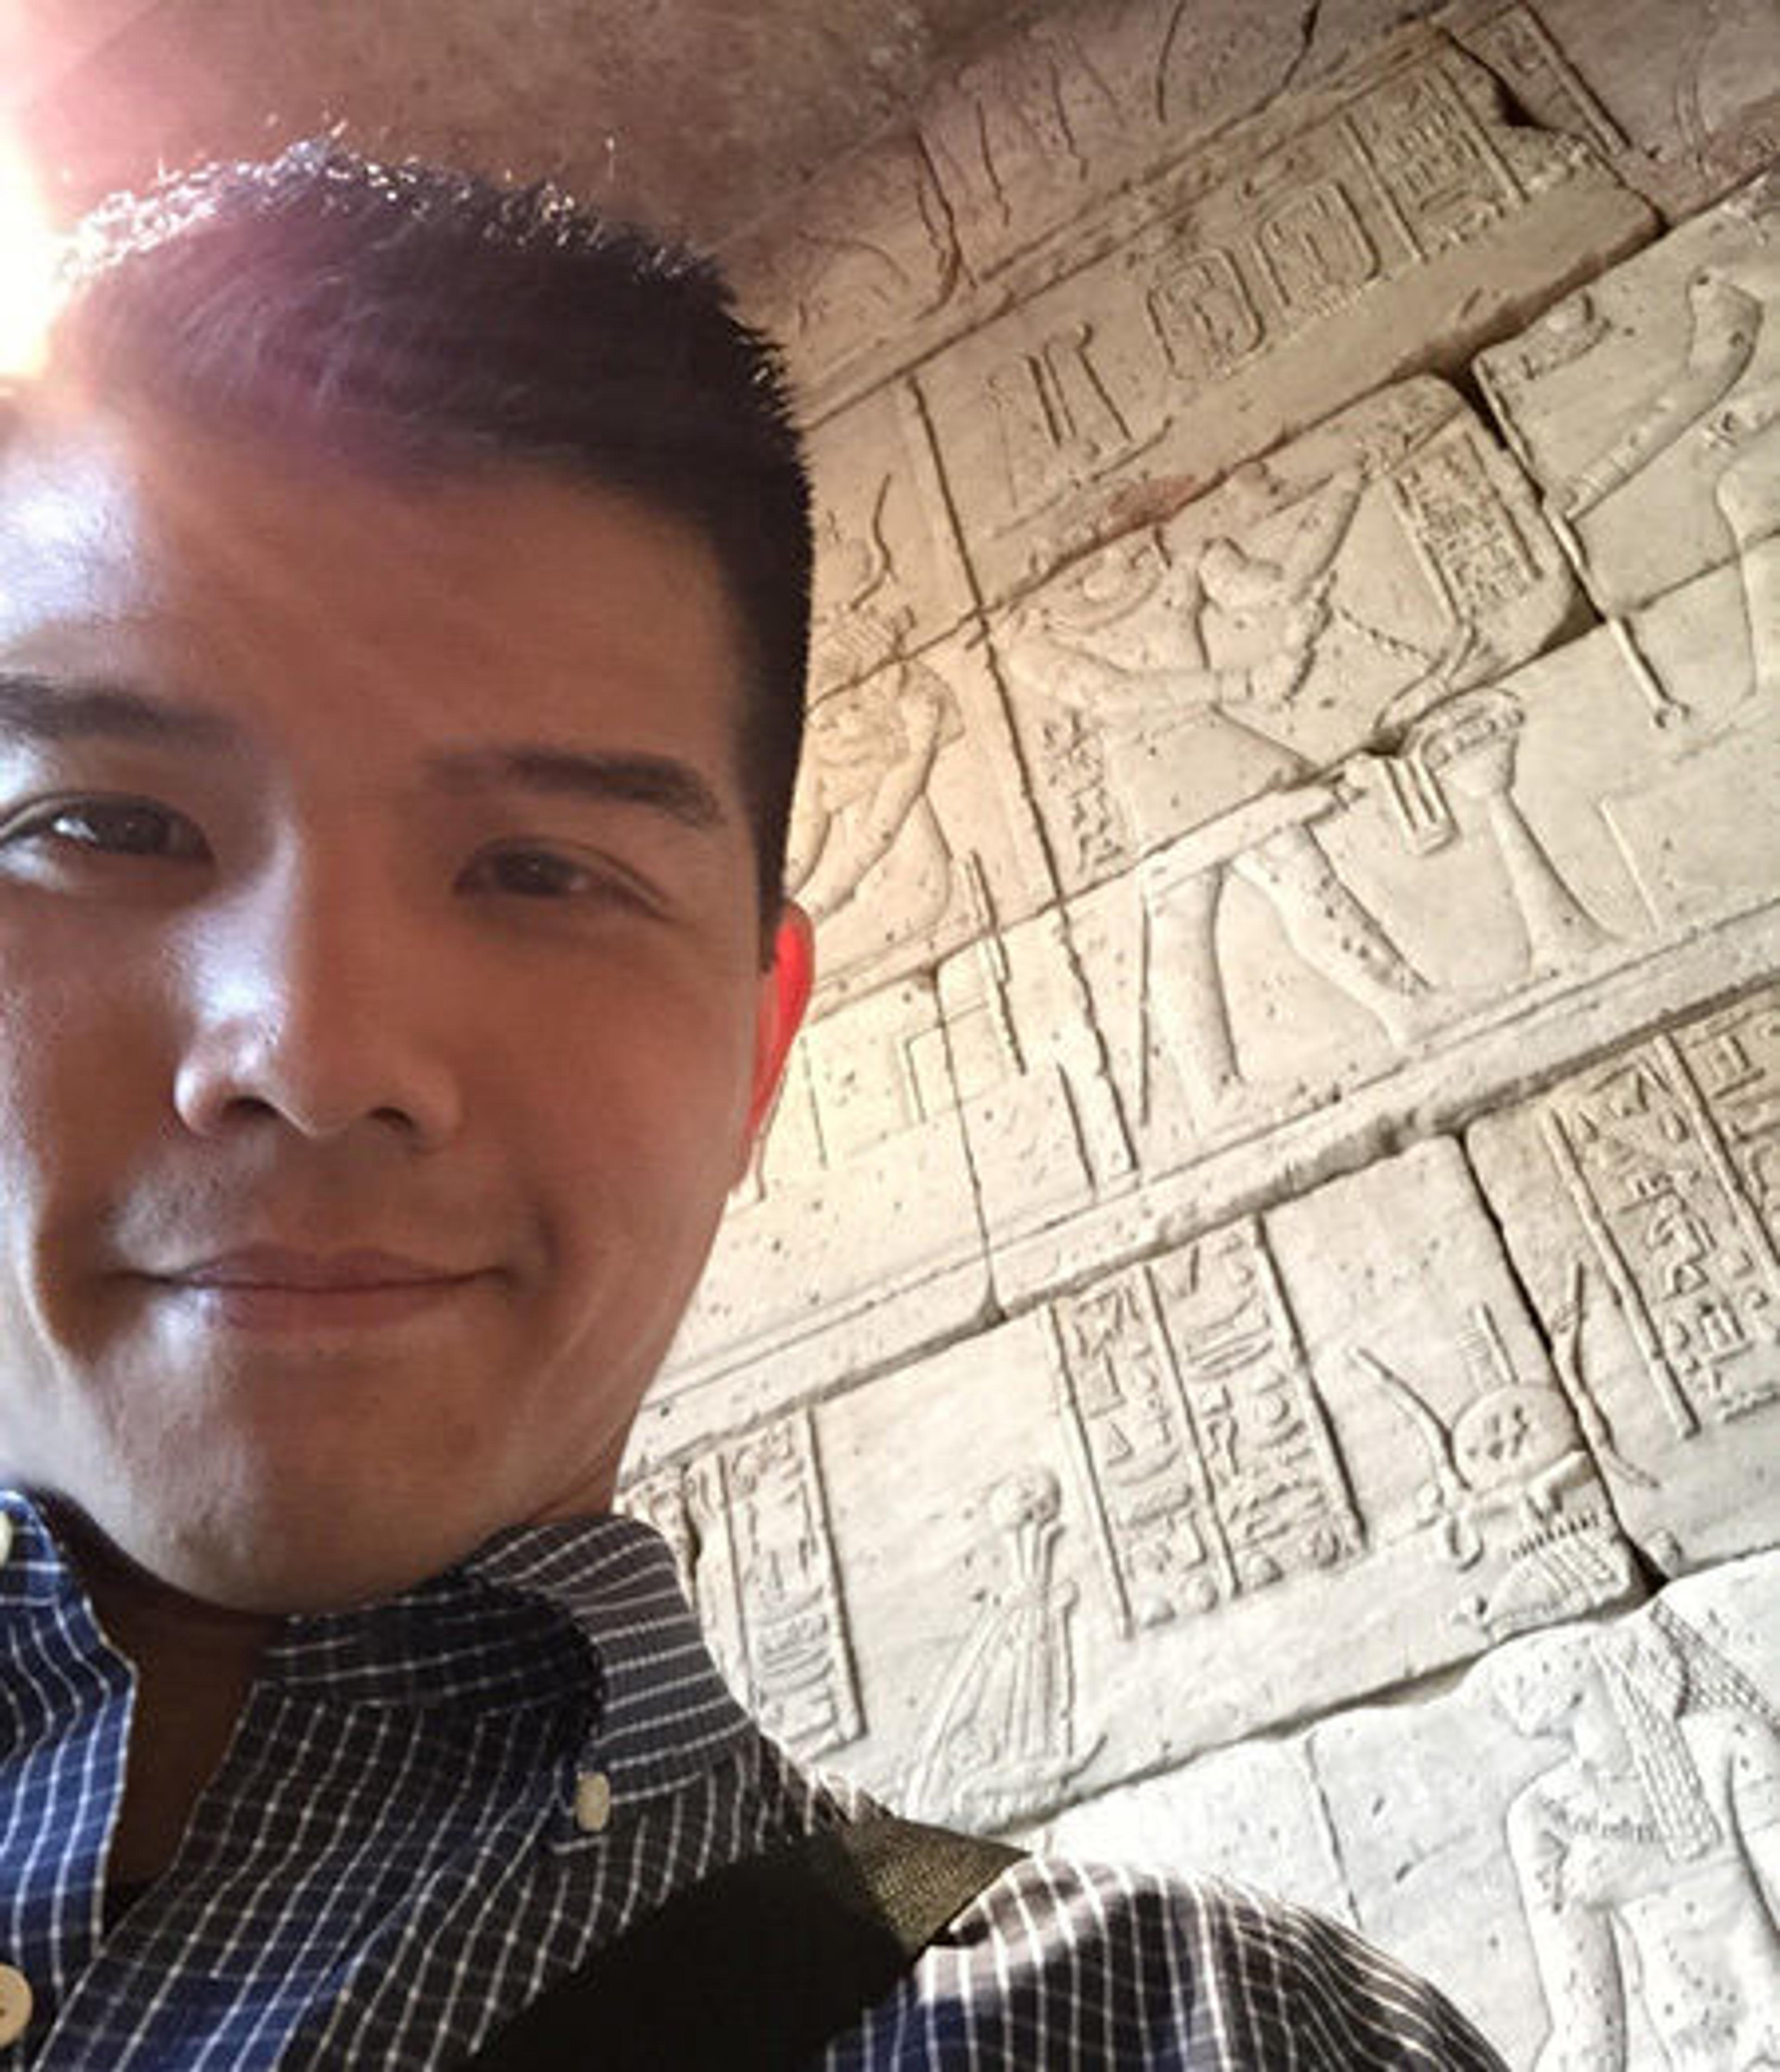 Telly takes a selfie inside The Temple of Dendur